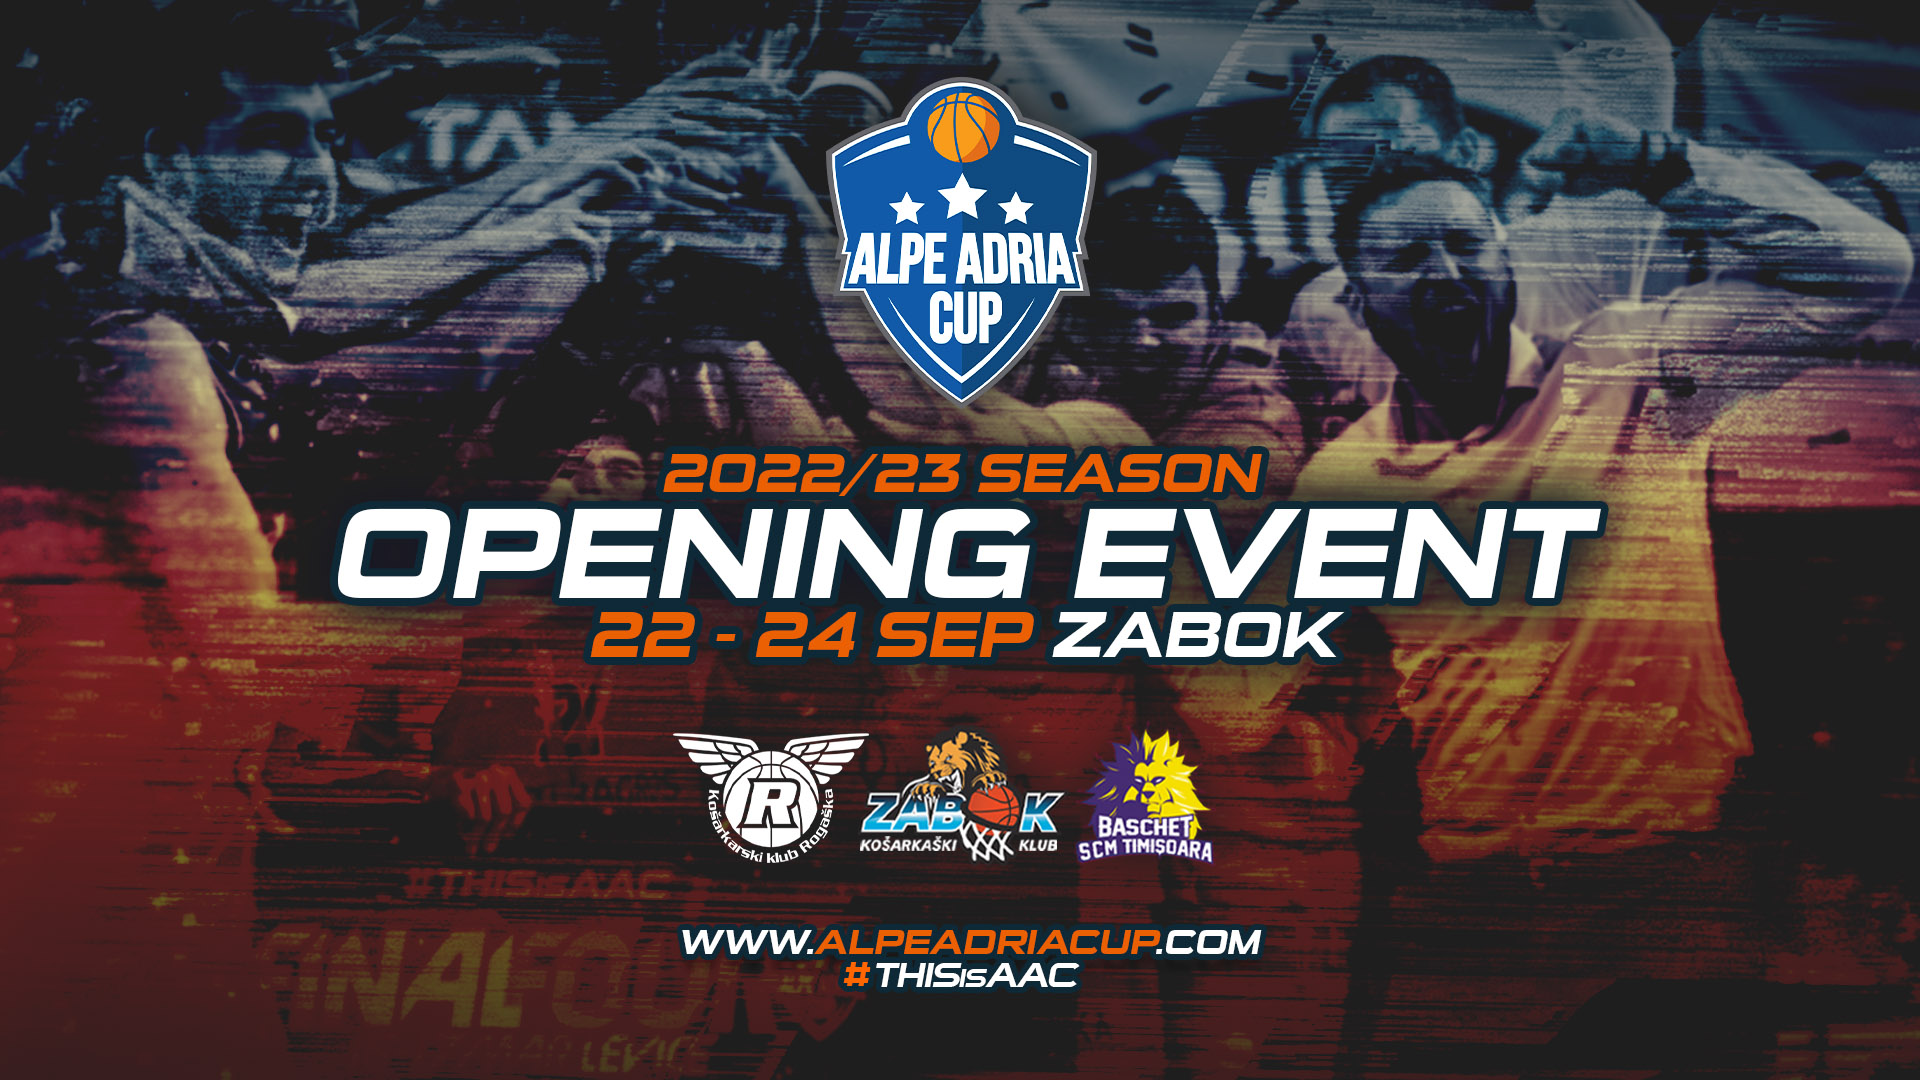 AAC’s new season kicks off on a high note with Opening Event in Zabok